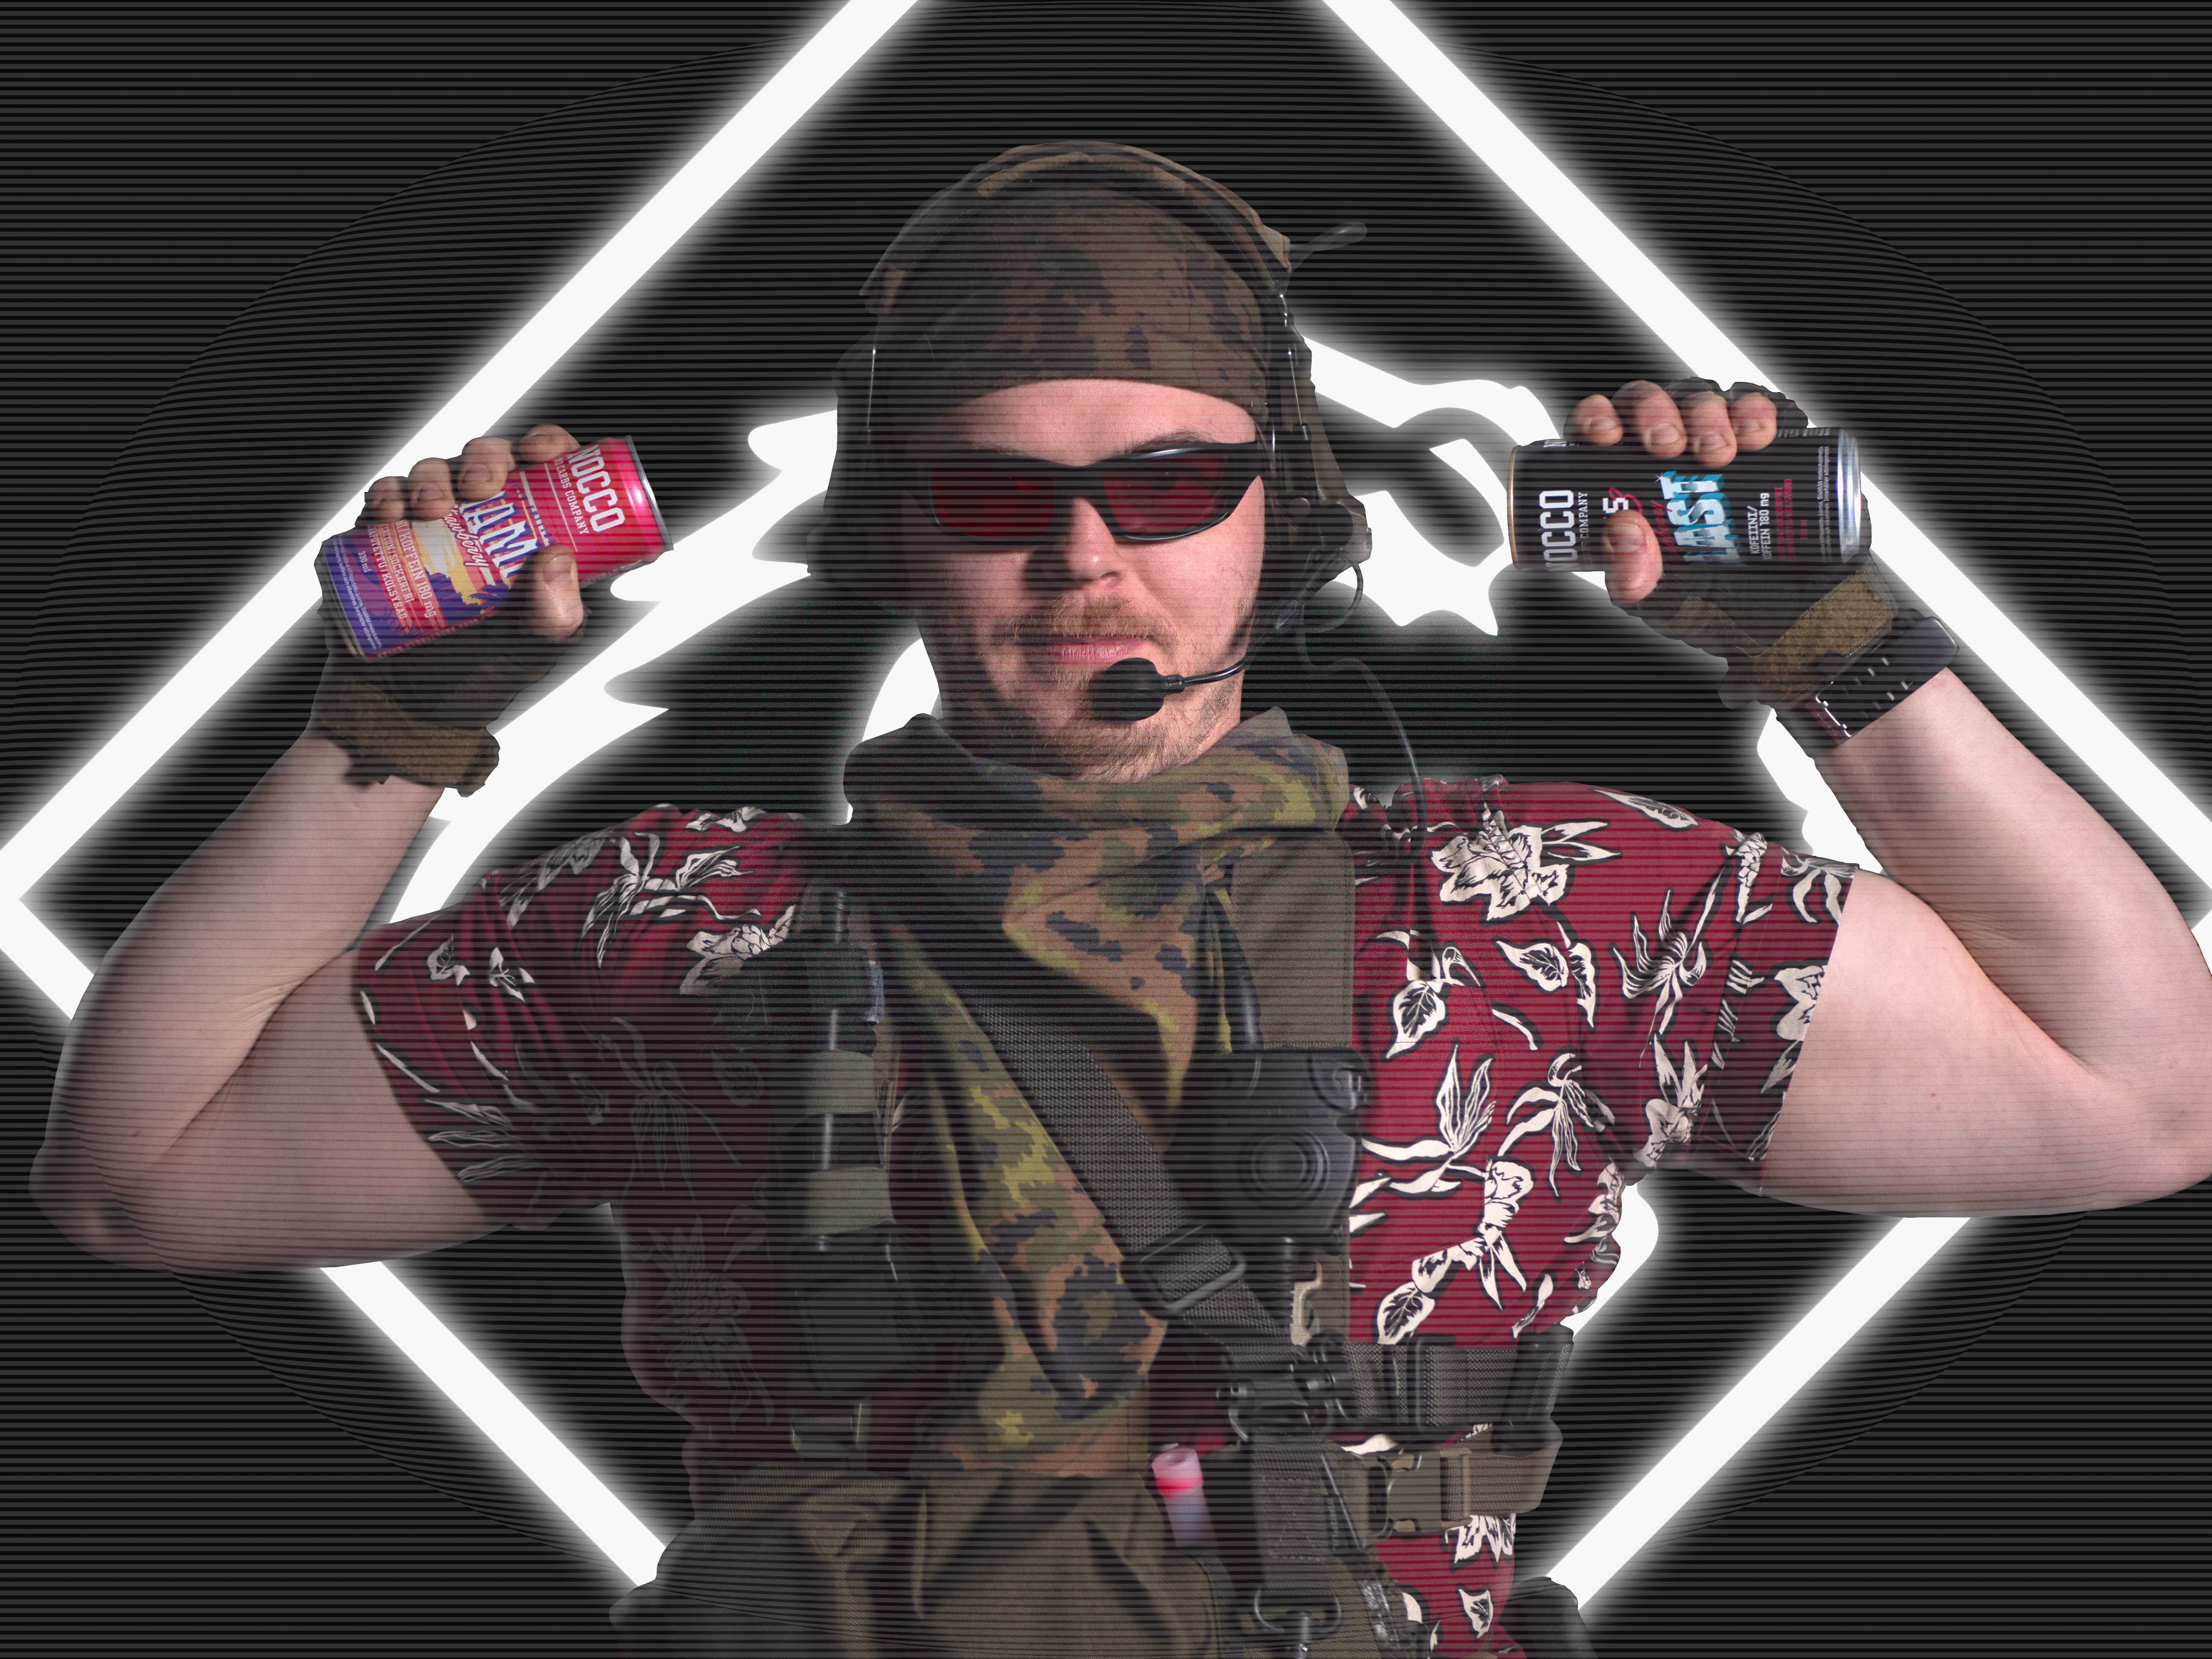 Man with nocco energy drinks in his hands standing infront of a retrowave background.